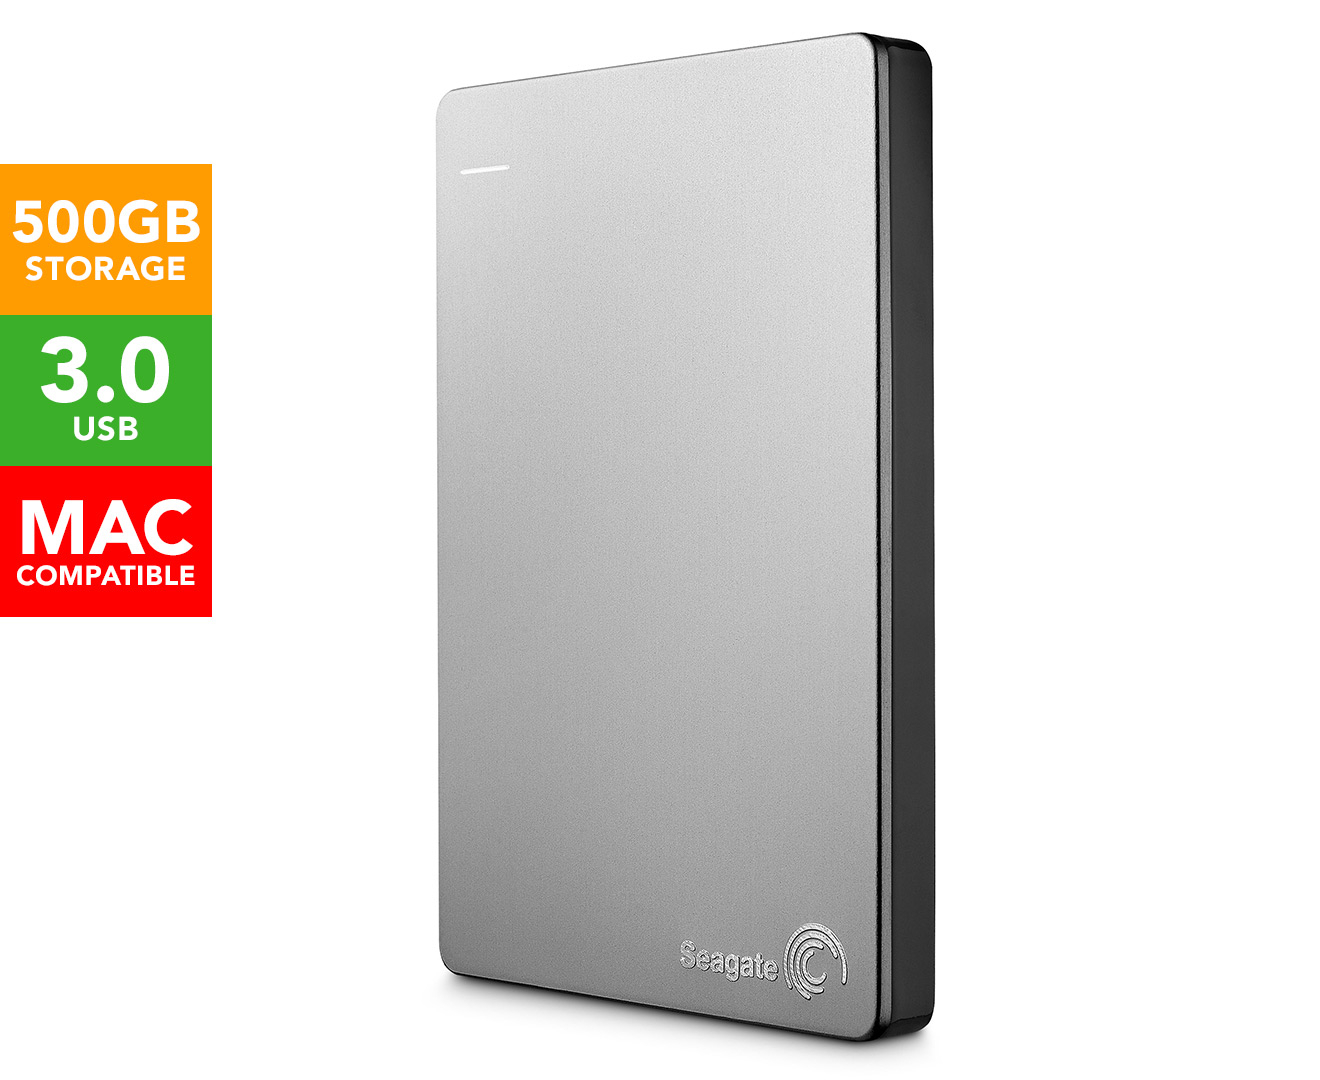 How to make seagate 500gb portable compatible for mac windows 10